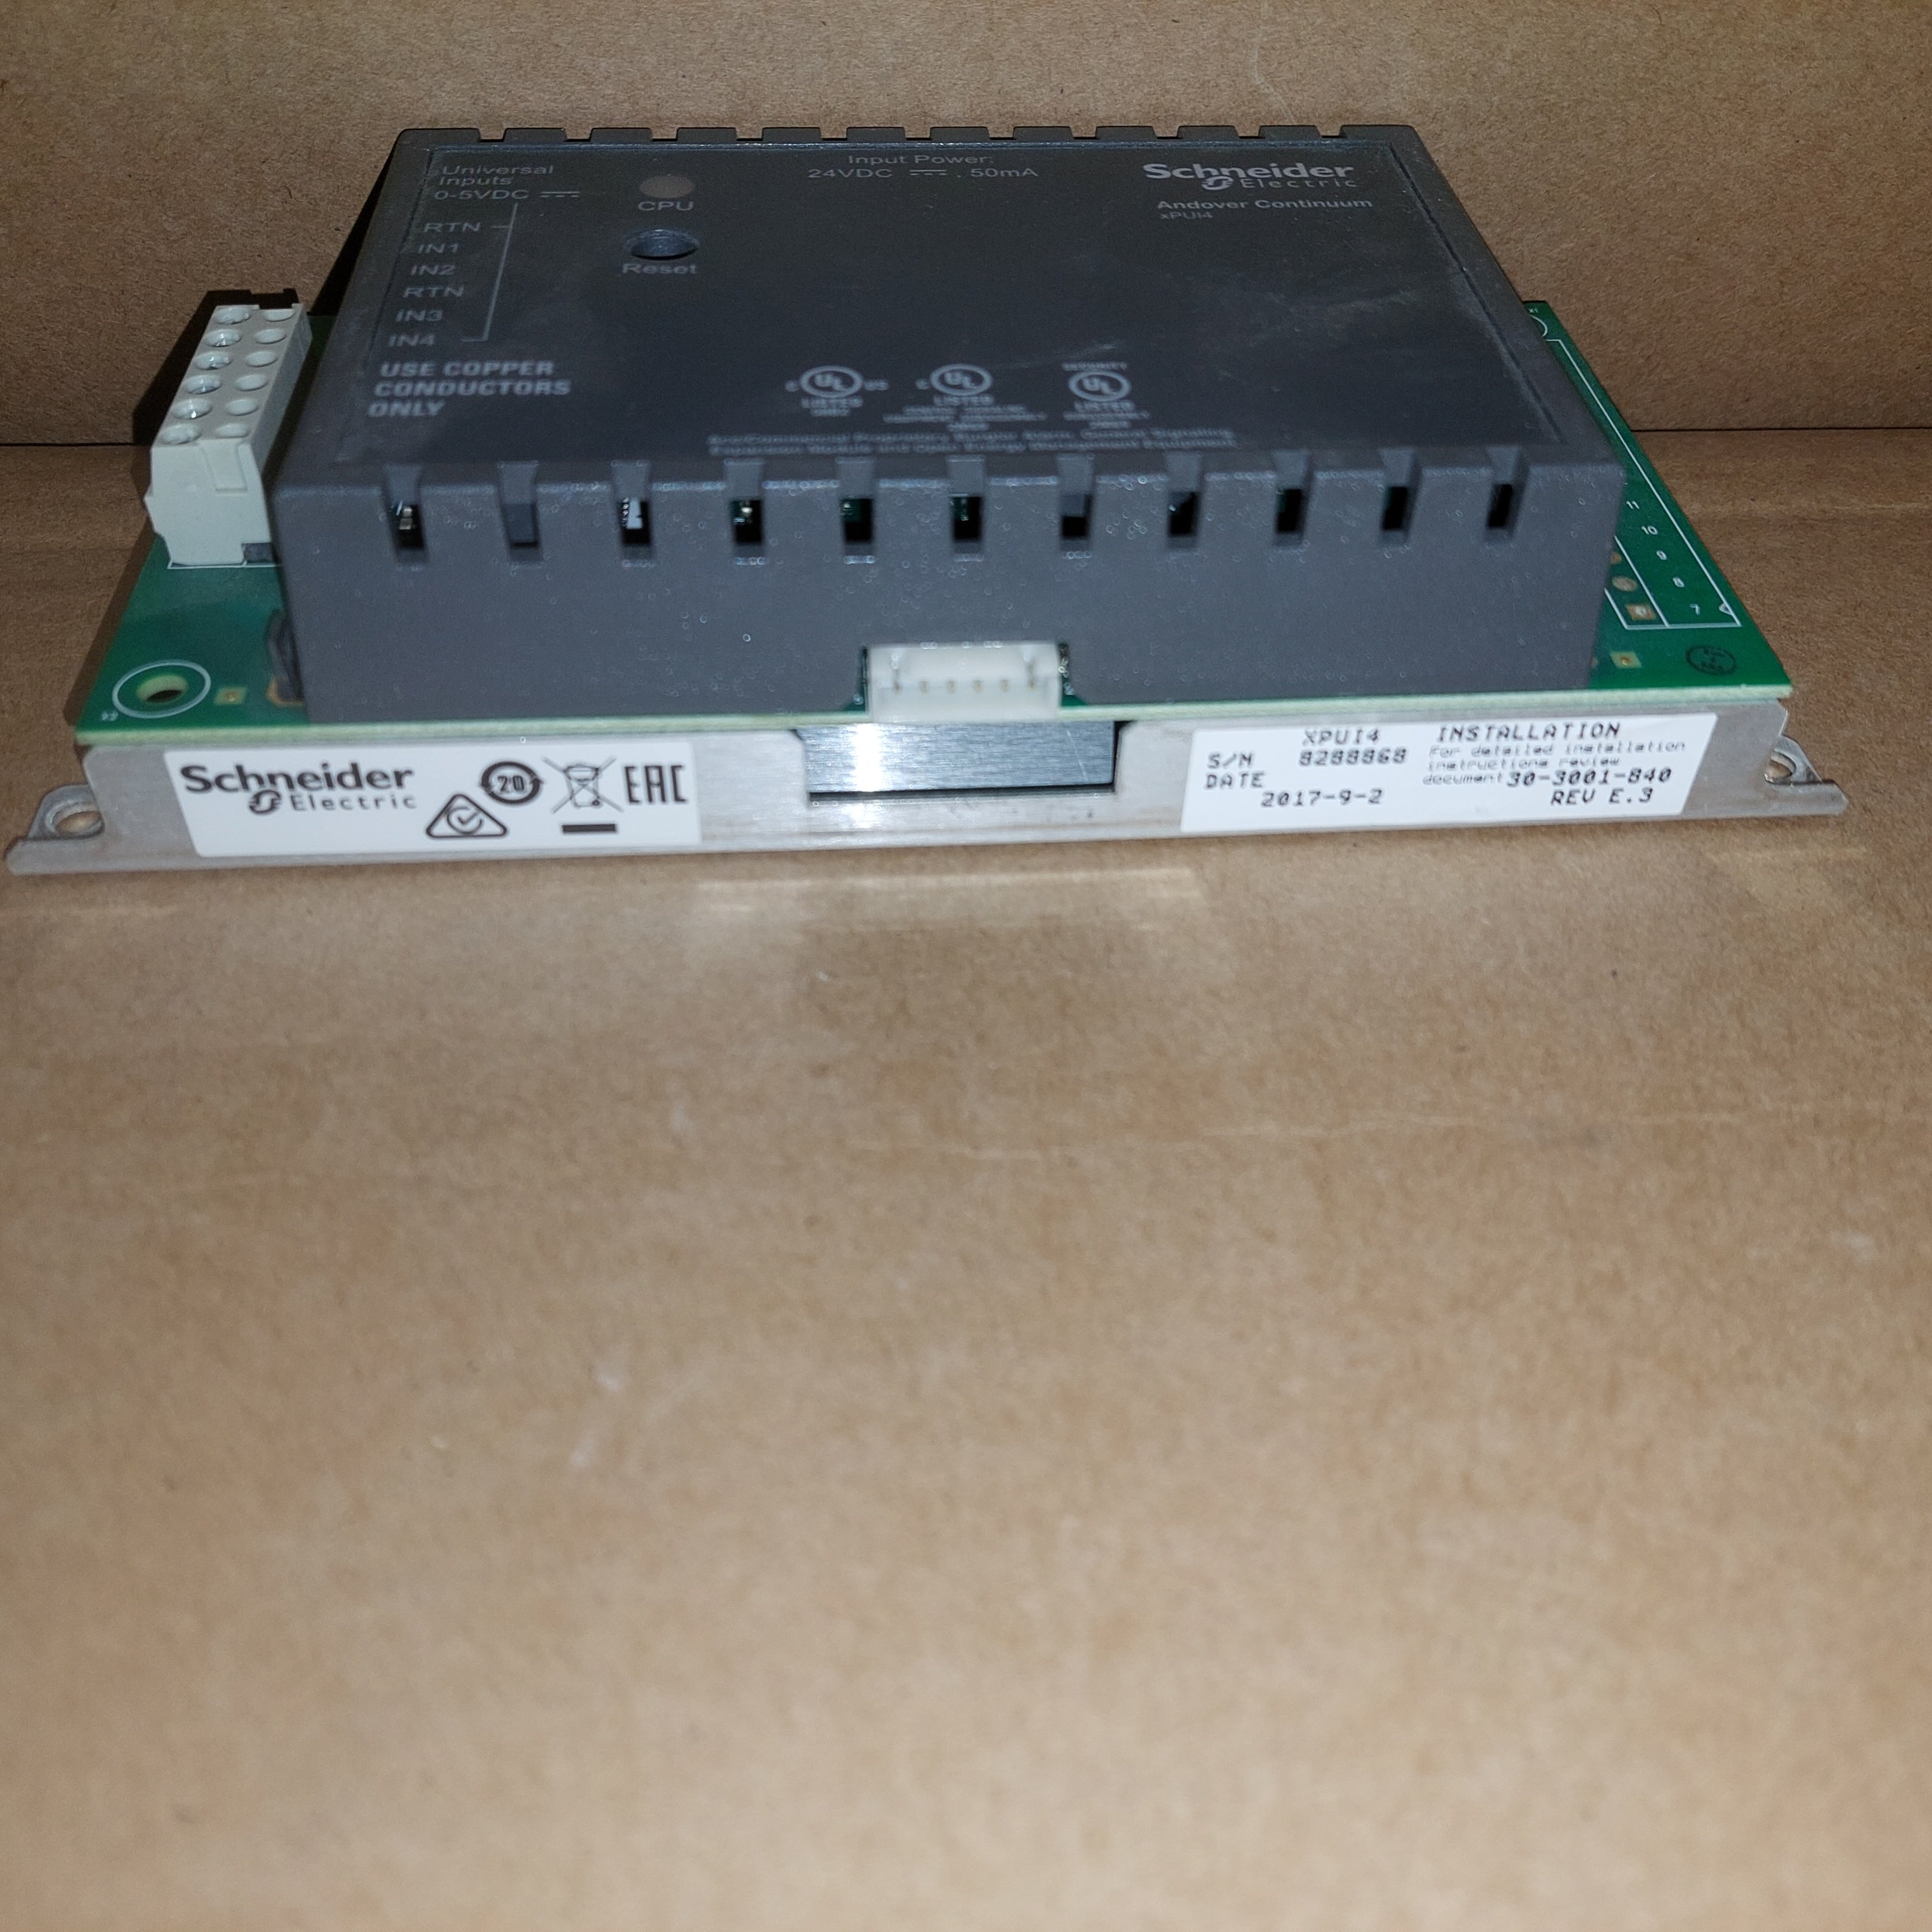 Schneider Electric Andover Continuum XPUI4 Expansion Module Used